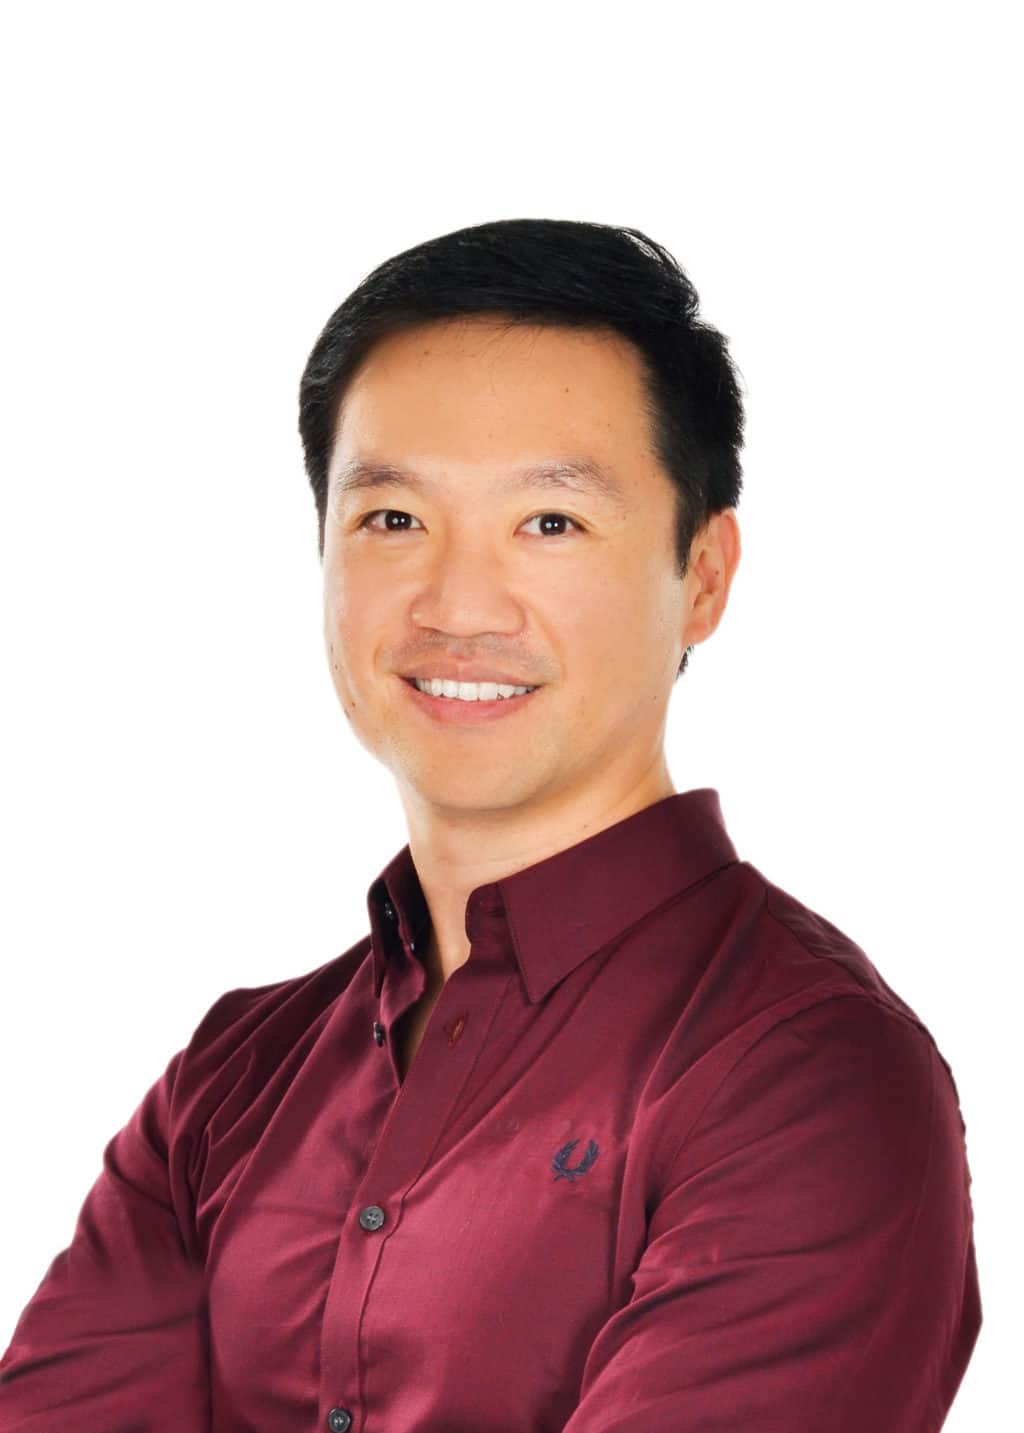 Dr Bernard Siew is from Adelaide, Australia, and qualified from University of Adelaide. He has practiced in Singapore for 17 years.